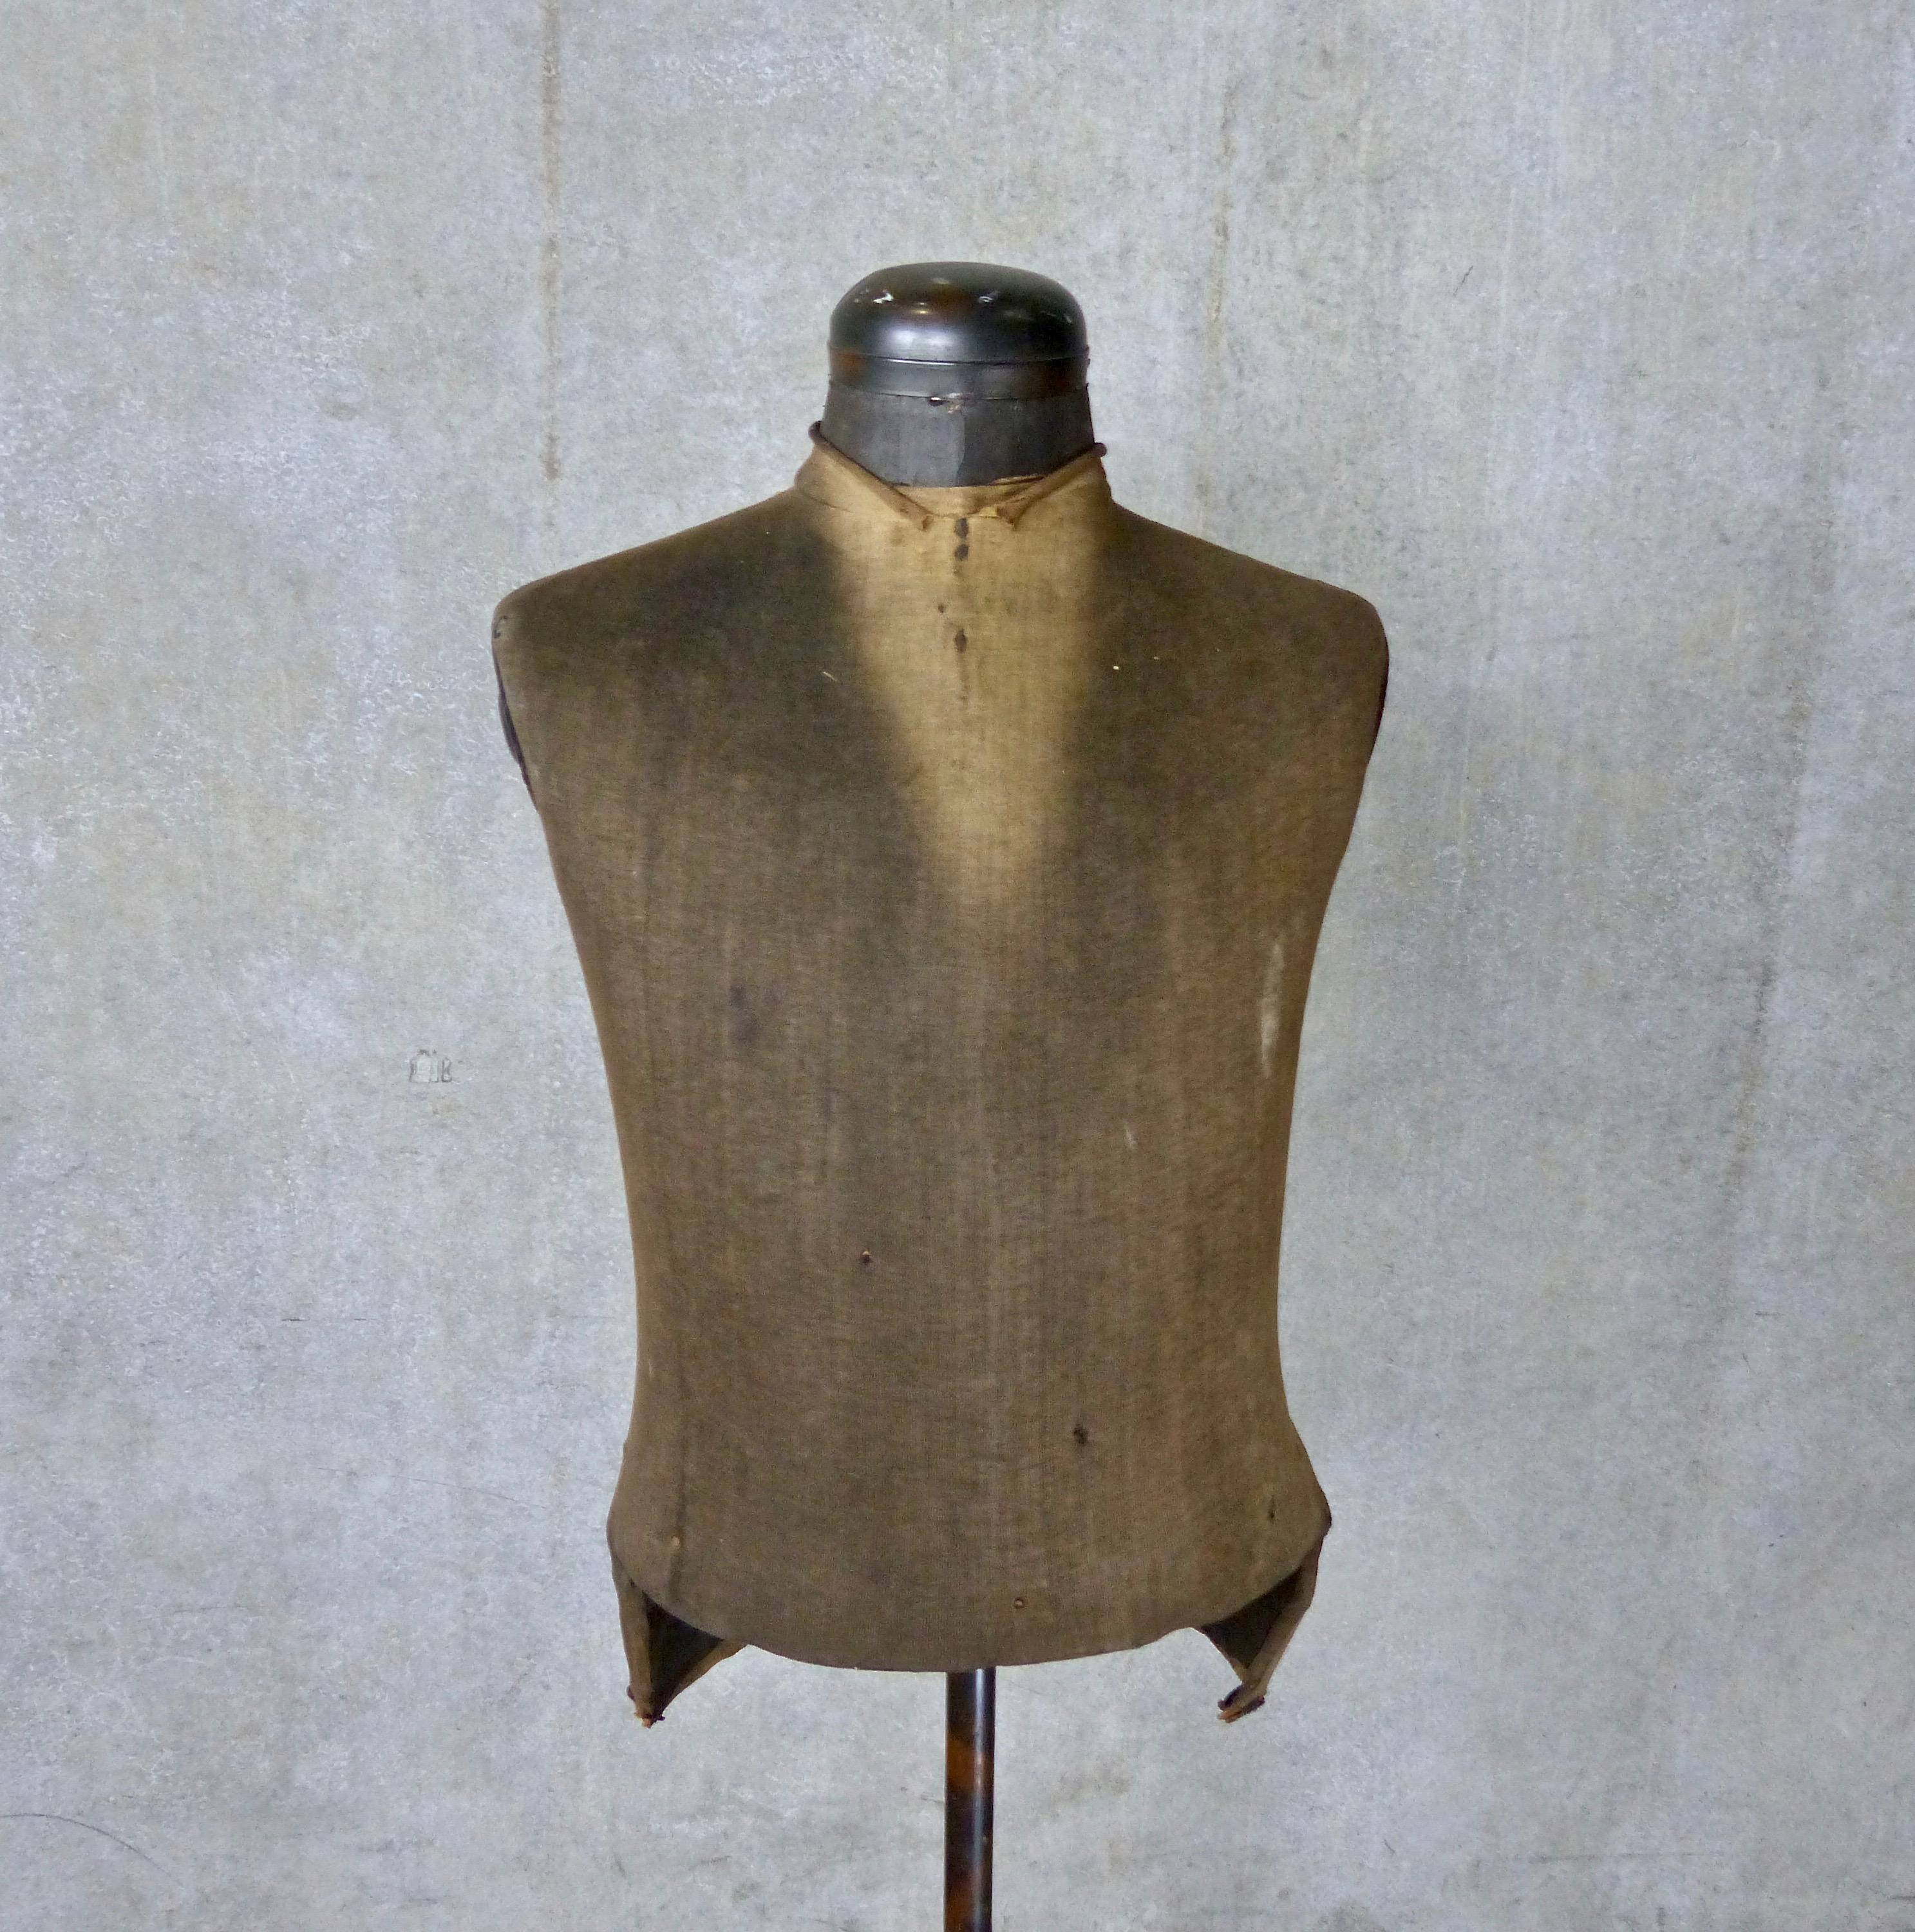 Canadian 1920s Rare Male Mannequin by Glatworthy Toronto